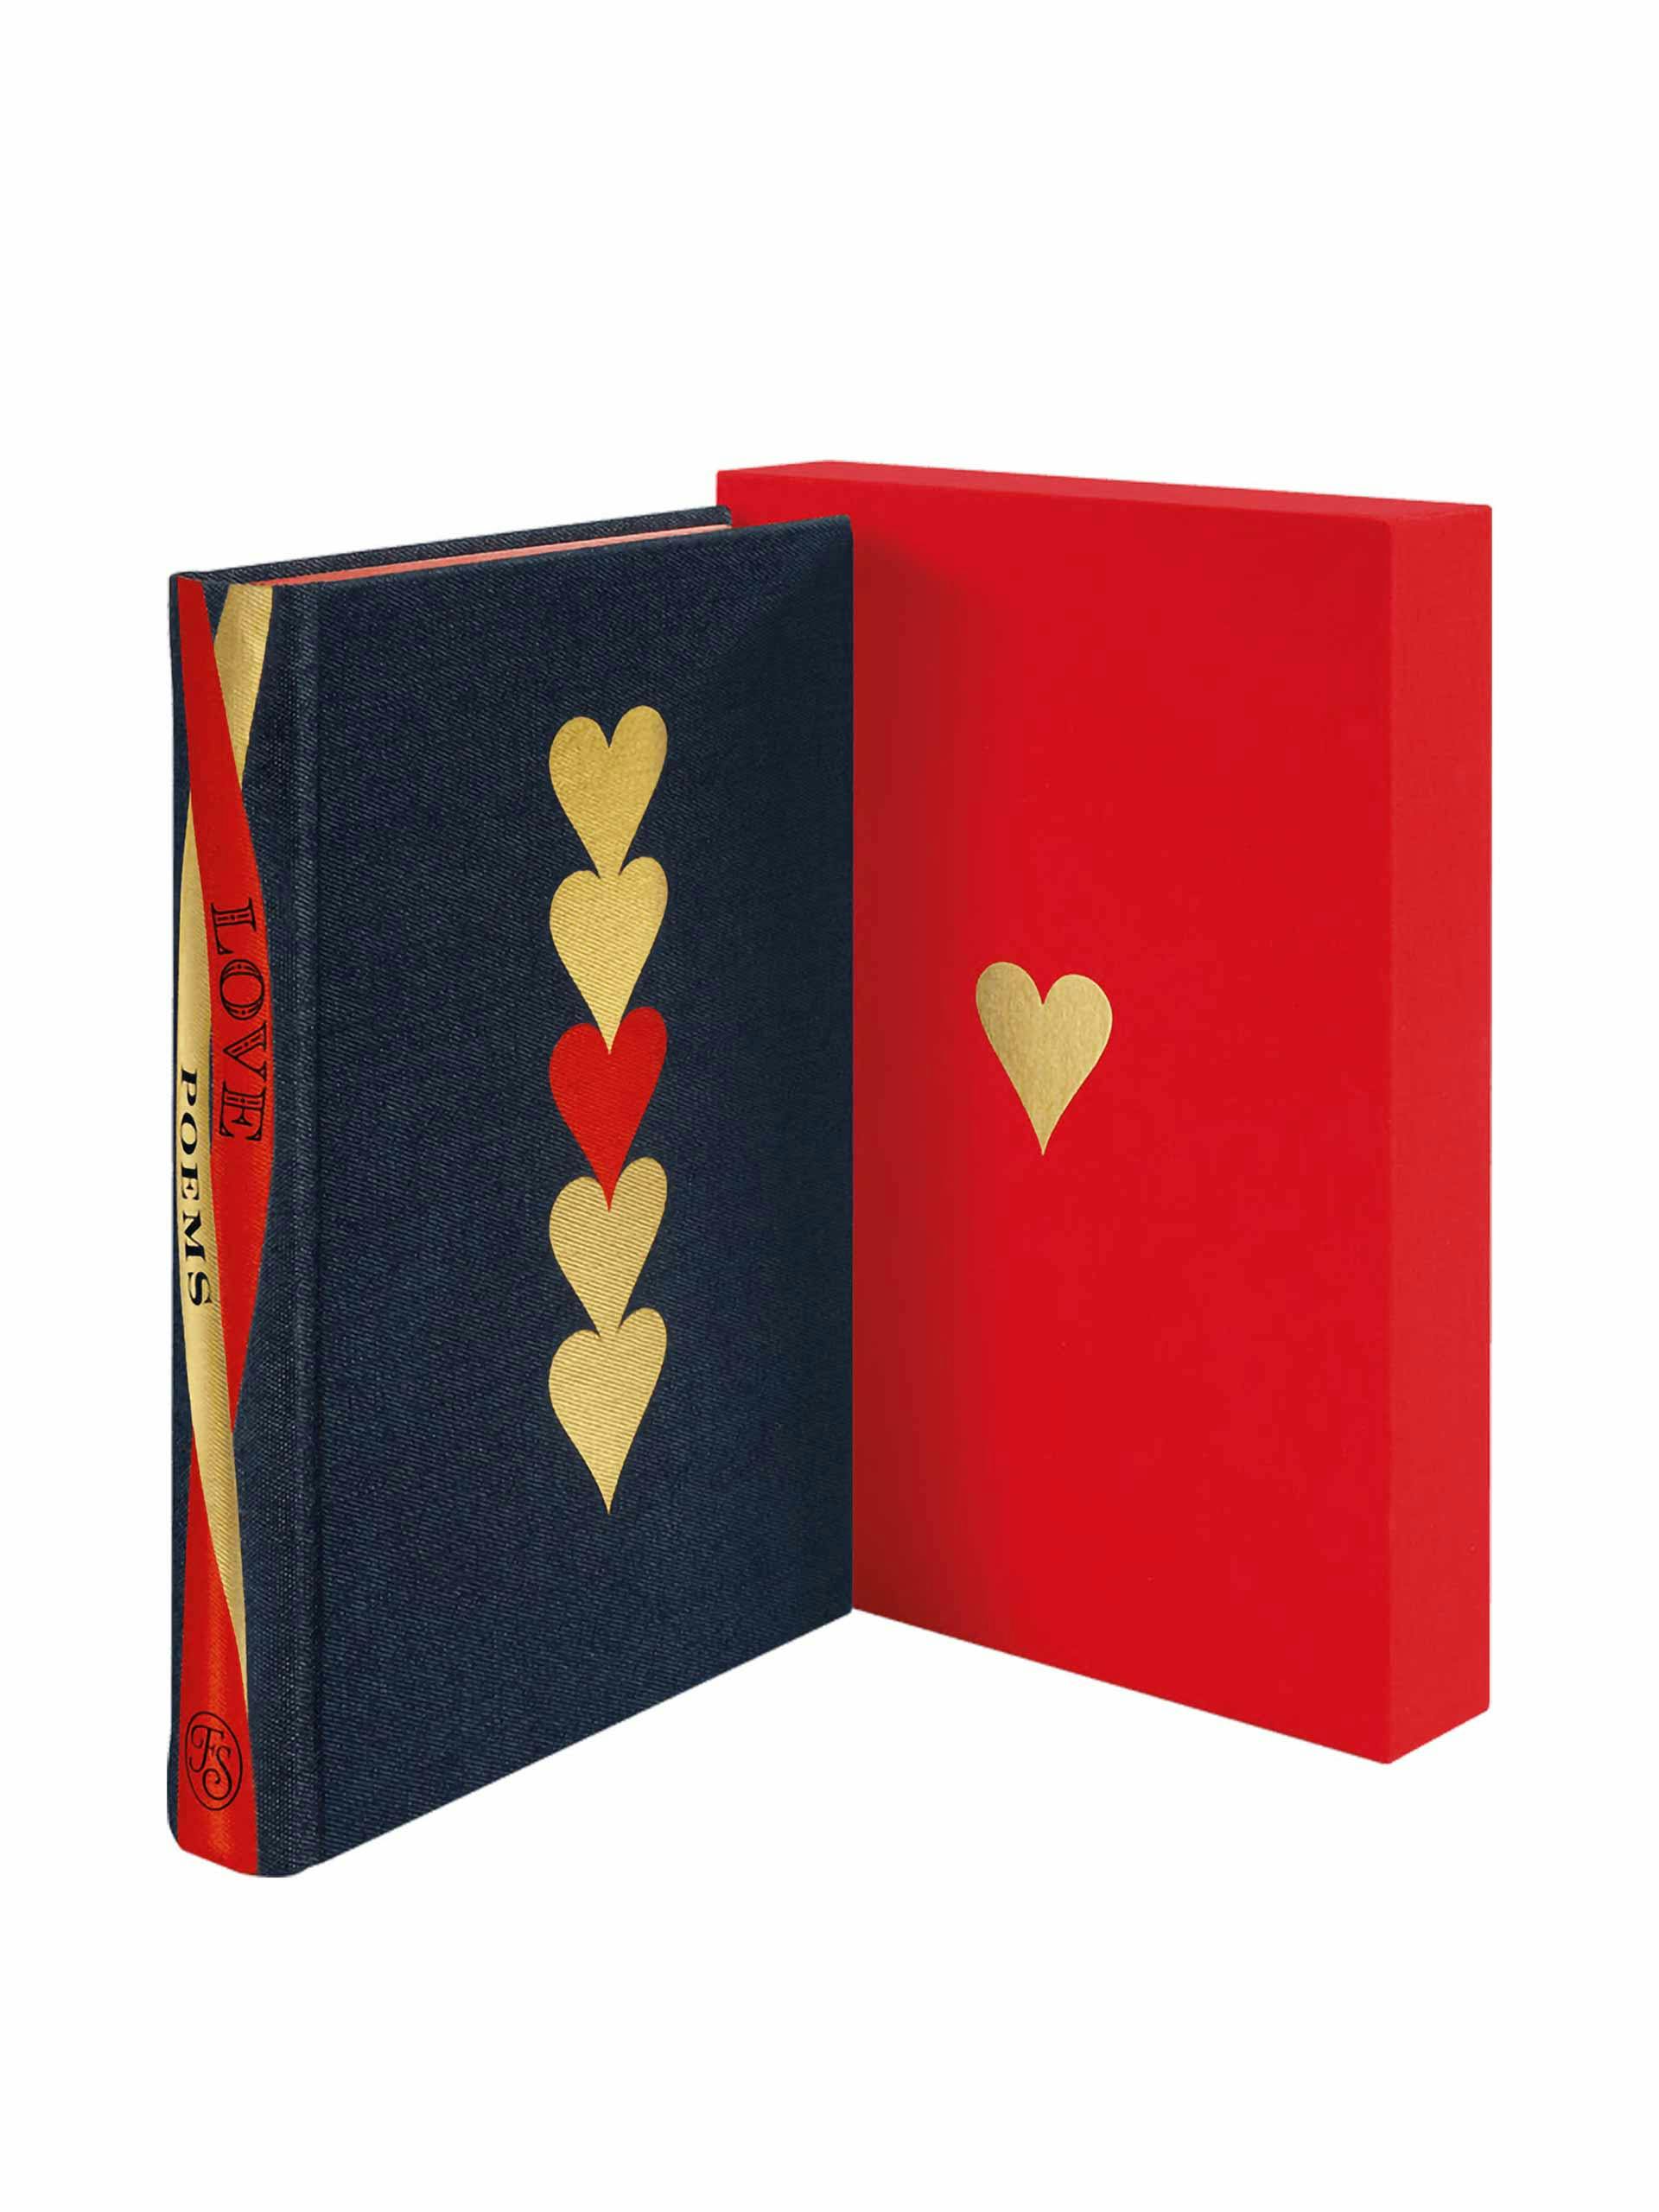 Love poems hardcover book